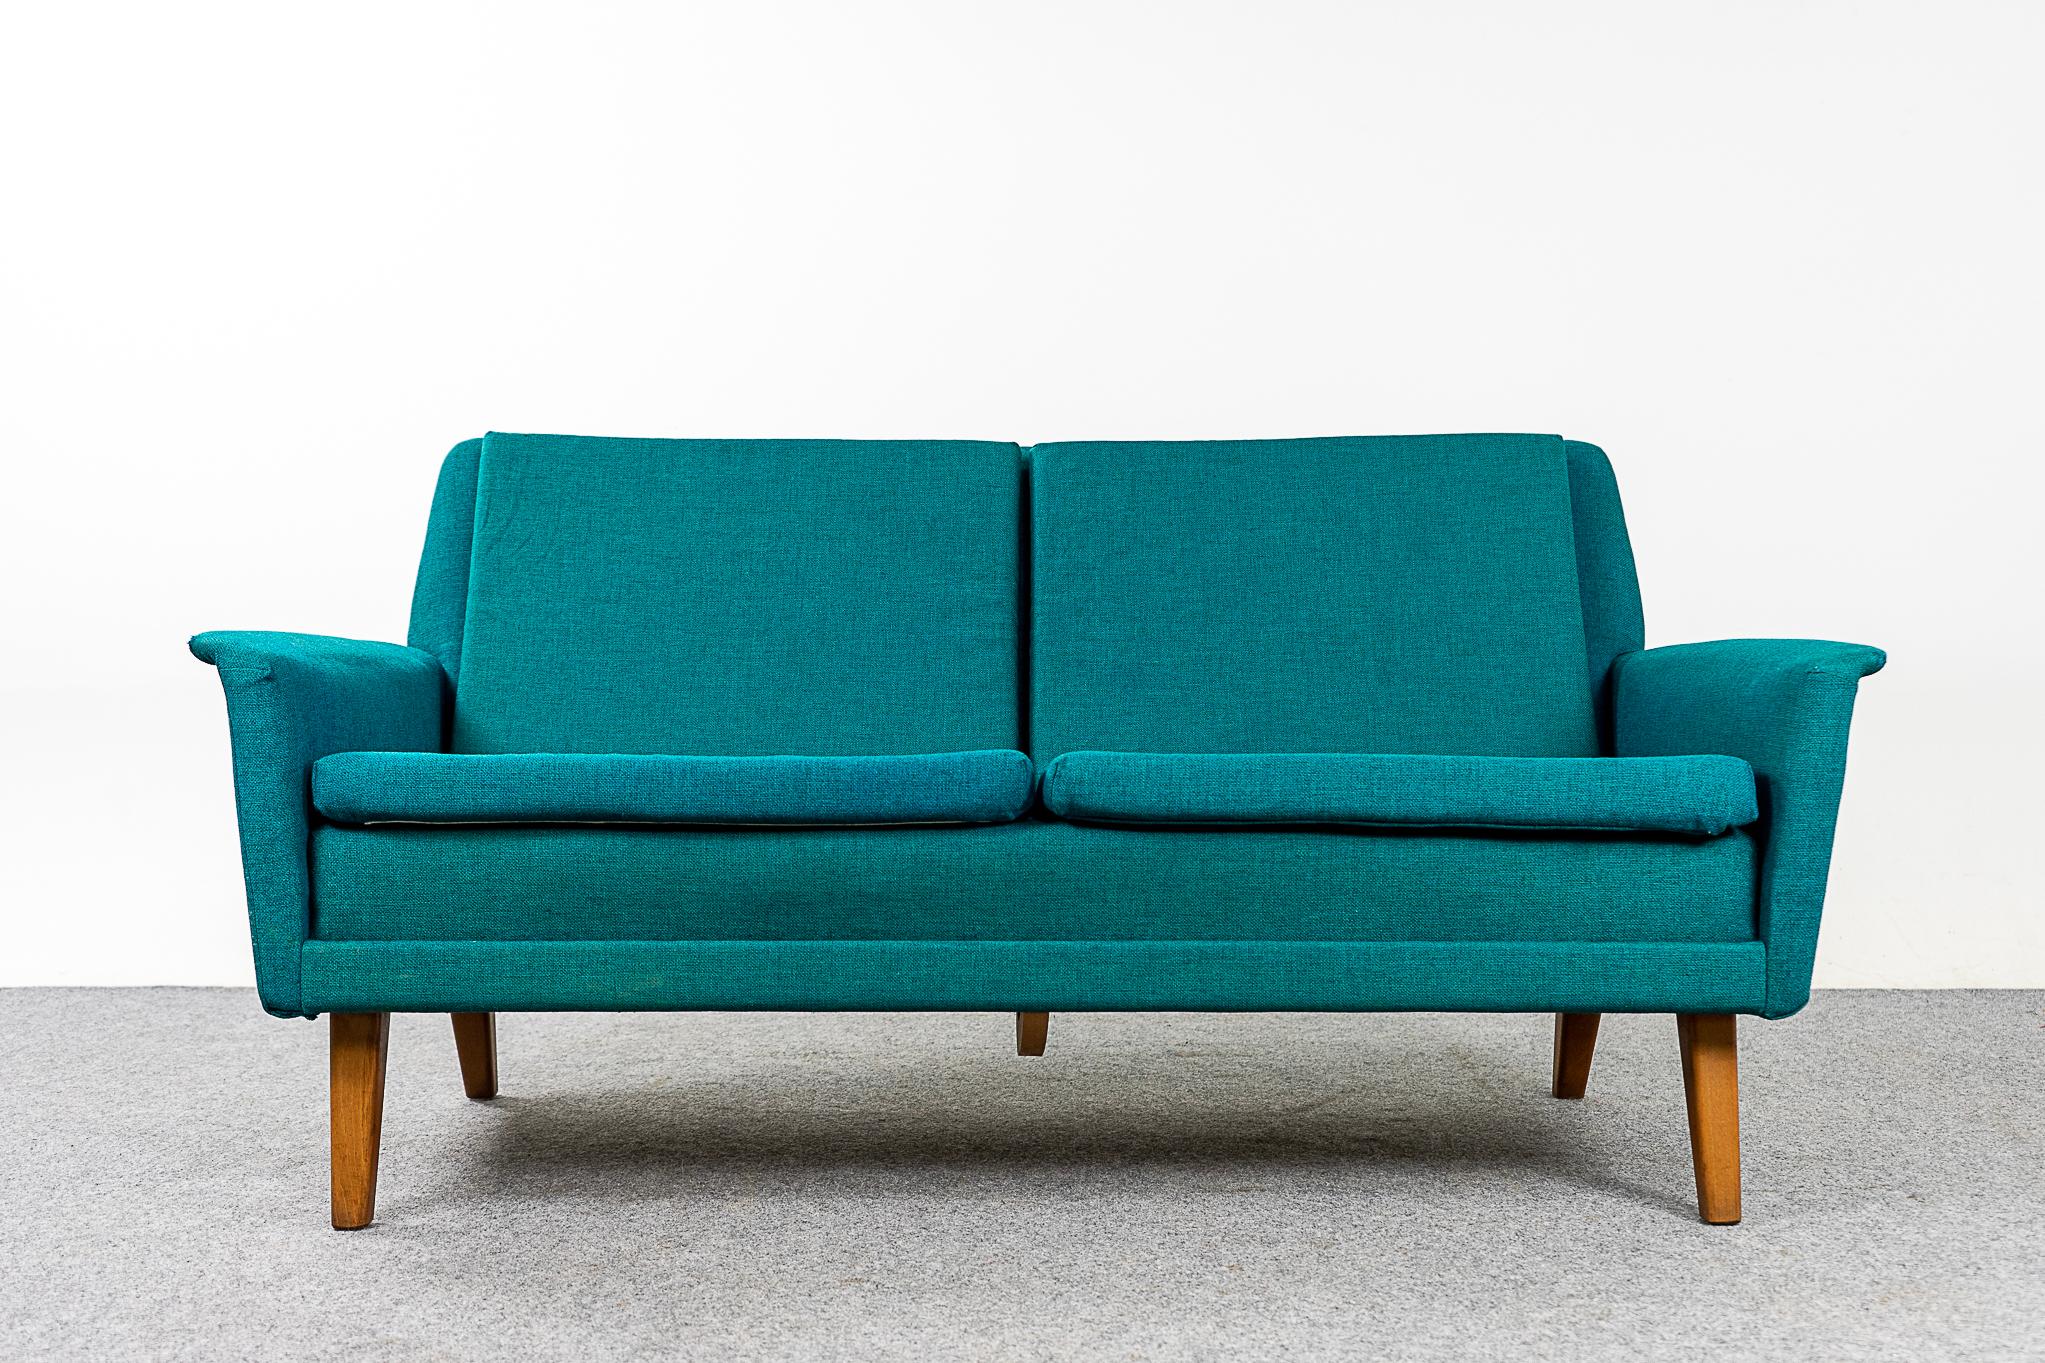 Beech wood Danish loveseat by Fritz Hansen, circa 1960s. Clean modern lines and contrasting solid beech legs. Original teal fabric shows wear & tear.

Please inquire for international shipping rates.